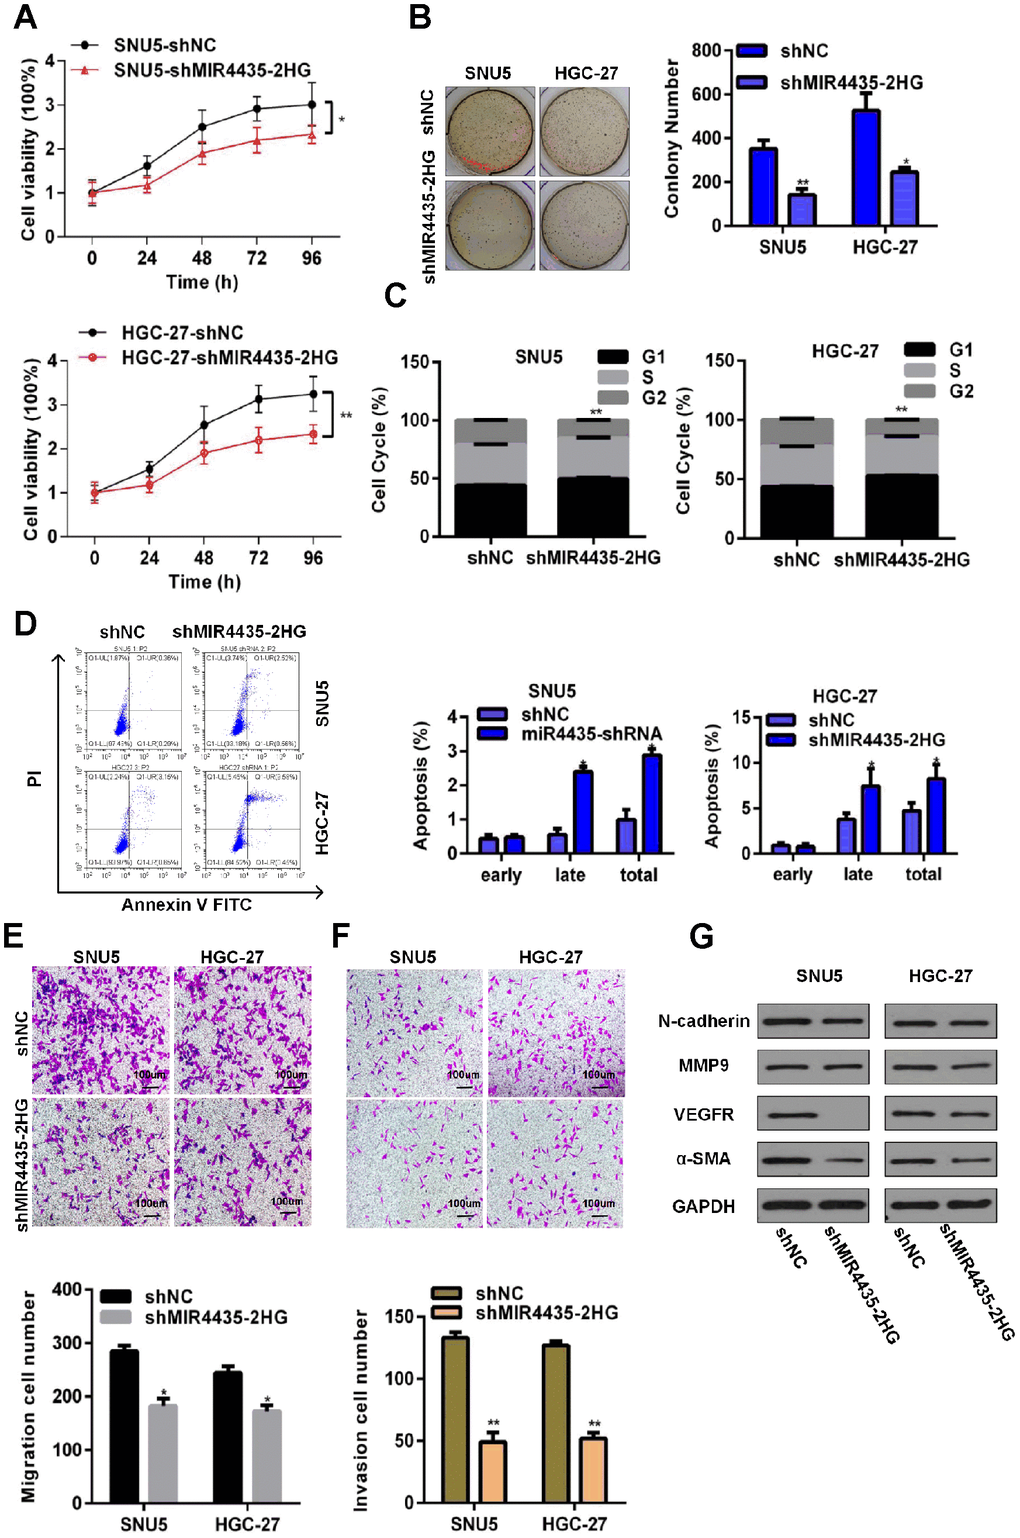 Depletion of MIR4435-2HG in GC cells inhibits cell growth and metastasis in vitro. (A) MIR4435-2HG knockdown inhibited cell proliferation (CCK8 assays) (*P **P B) Colony formation assays were used to evaluate SNU5 and HGC-27 cell proliferation after inhibiting expression of MIR4435-2HG (*P **P C) The cell cycle was analyzed using flow cytometry after knocking down MIR4435-2HG (**P D) Flow cytometric apoptosis assays were used to analyze the incidence of apoptosis after silencing MIR4435-2HG (*P E) MIR4435-2HG inhibition decreased cell migration in transwell assays (*P F) Transwell assays used to assess the invasiveness of cells with downregulated MIR4435-2HG (**P G) Expression of N-cadherin, MMP-9, VEGF and α-SMA in SNU5 and HGC-27 cells was detected by WB after decreasing MIR4435-2HG expression.